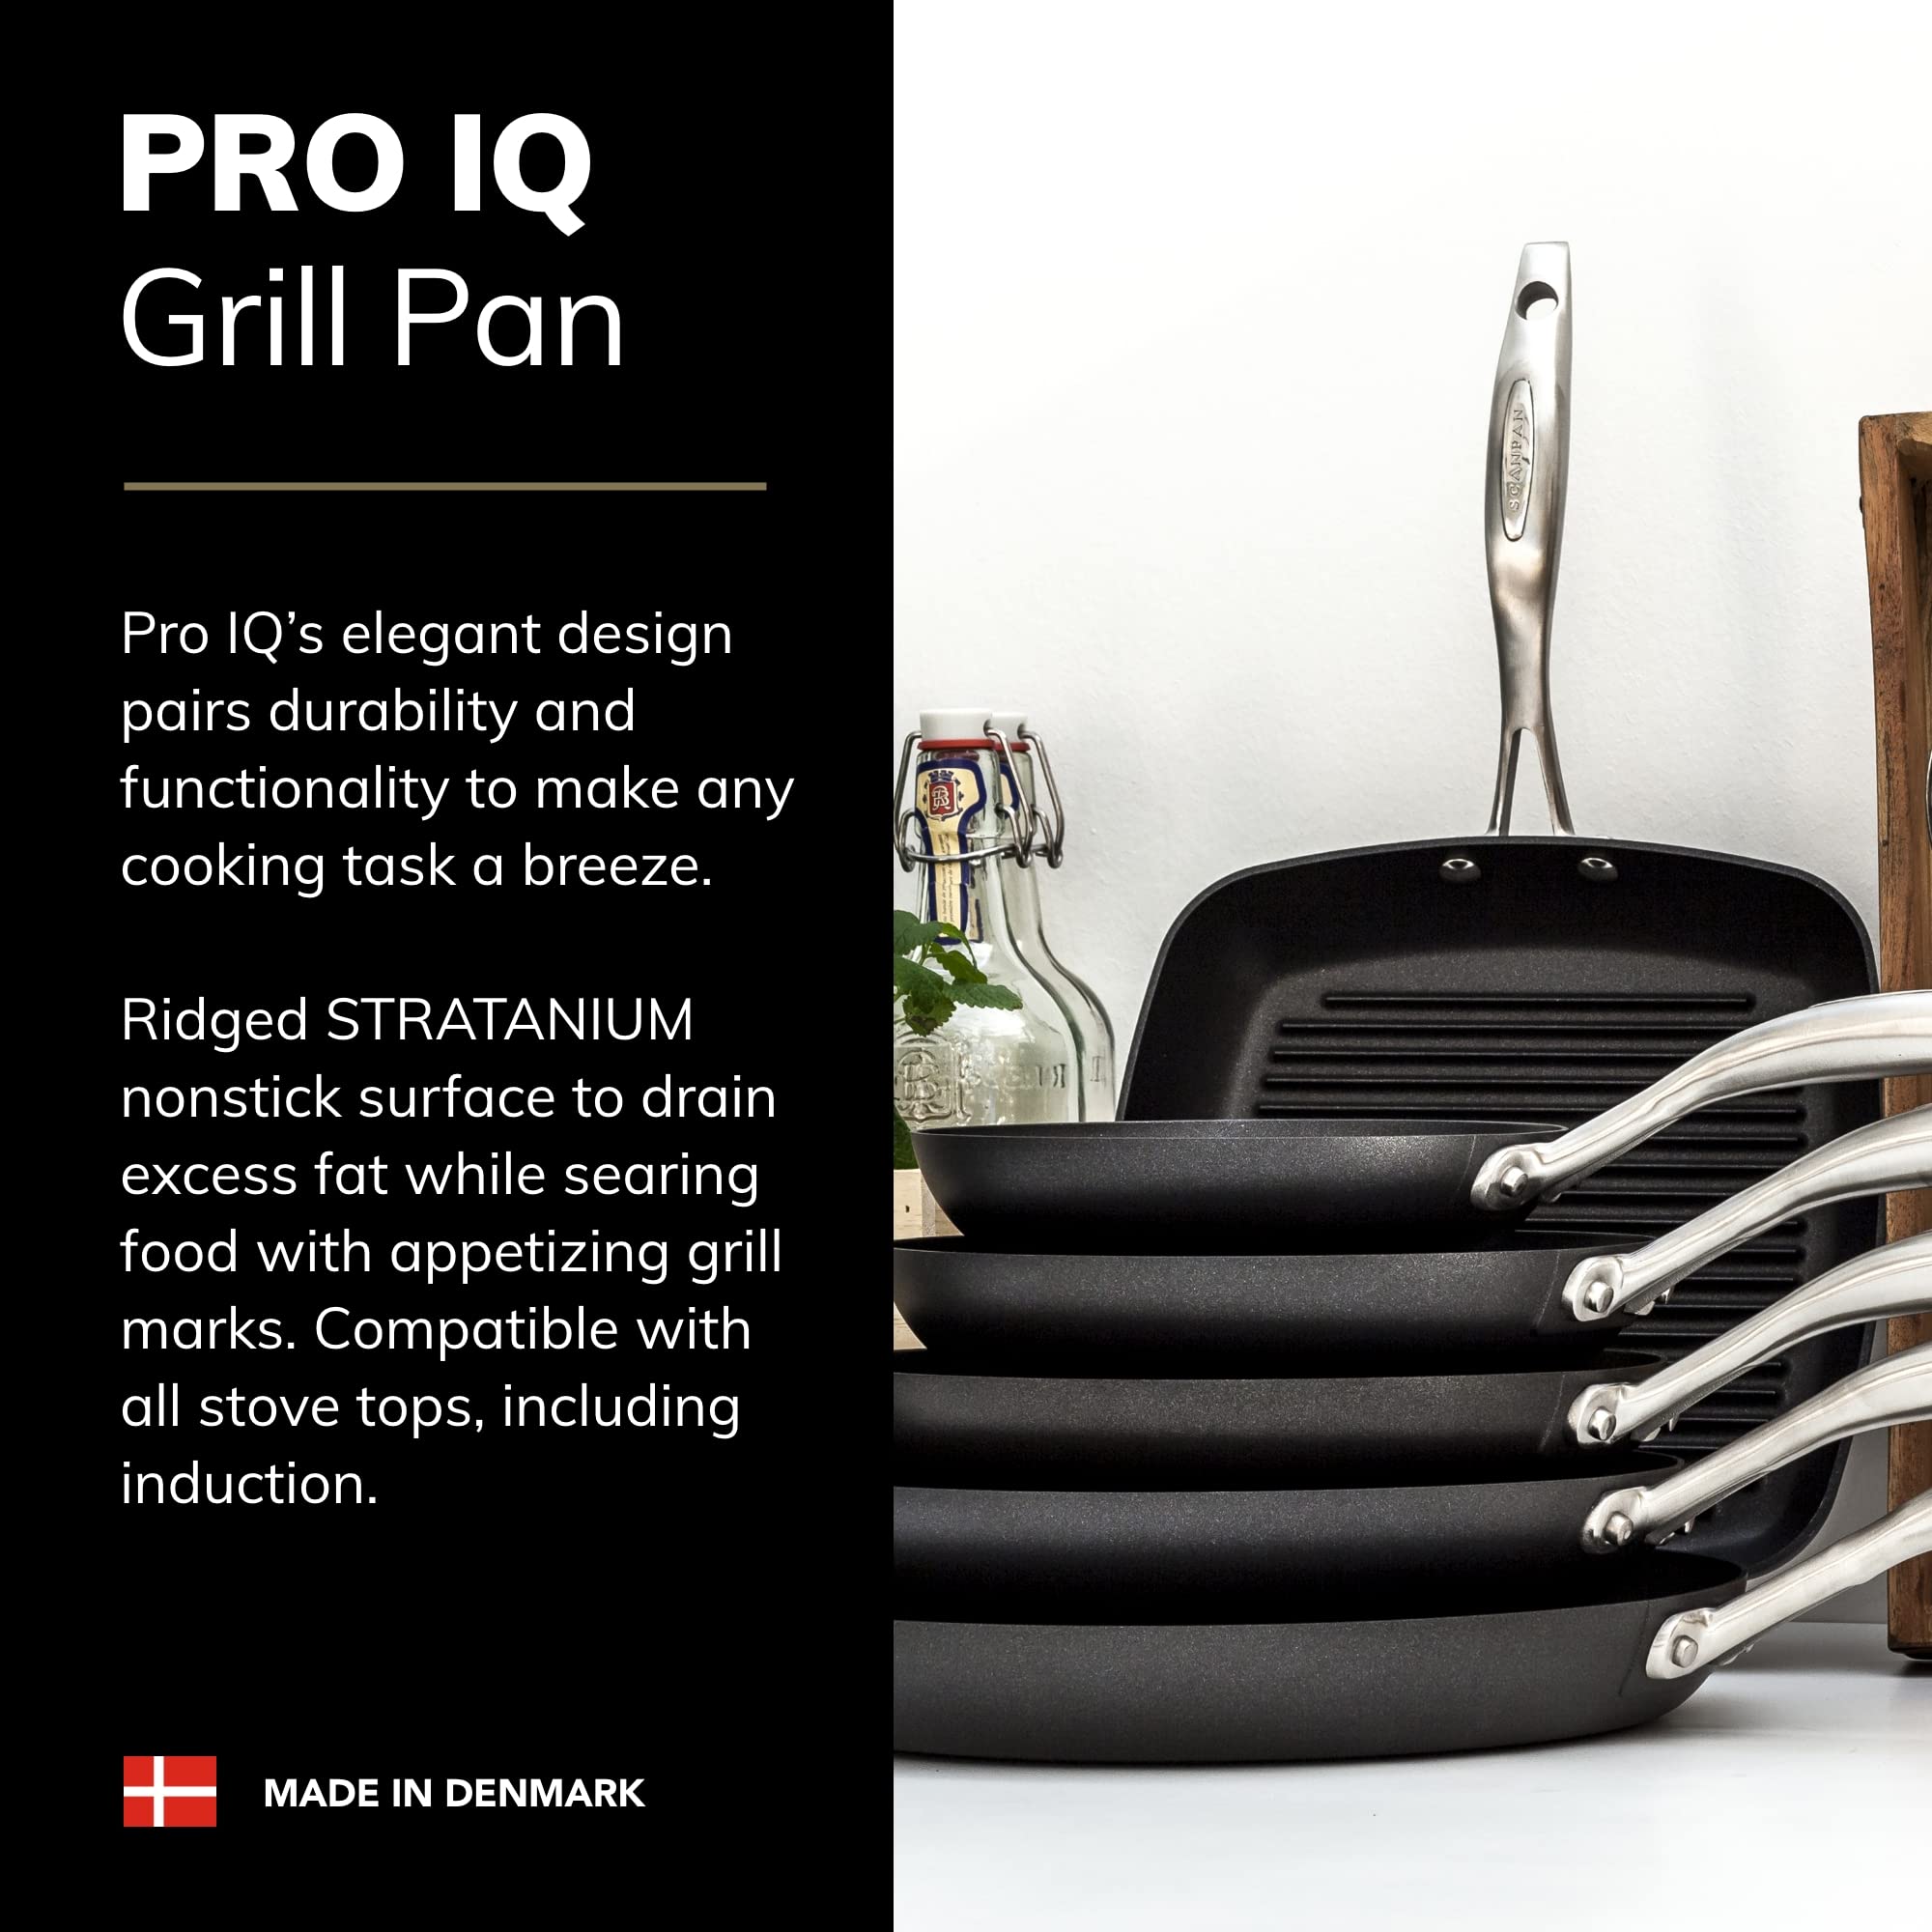 Scanpan Pro IQ 10.5” Square Grill Pan - Easy-to-Use Nonstick Cookware - Dishwasher, Metal Utensil & Oven Safe - Made by Hand in Denmark